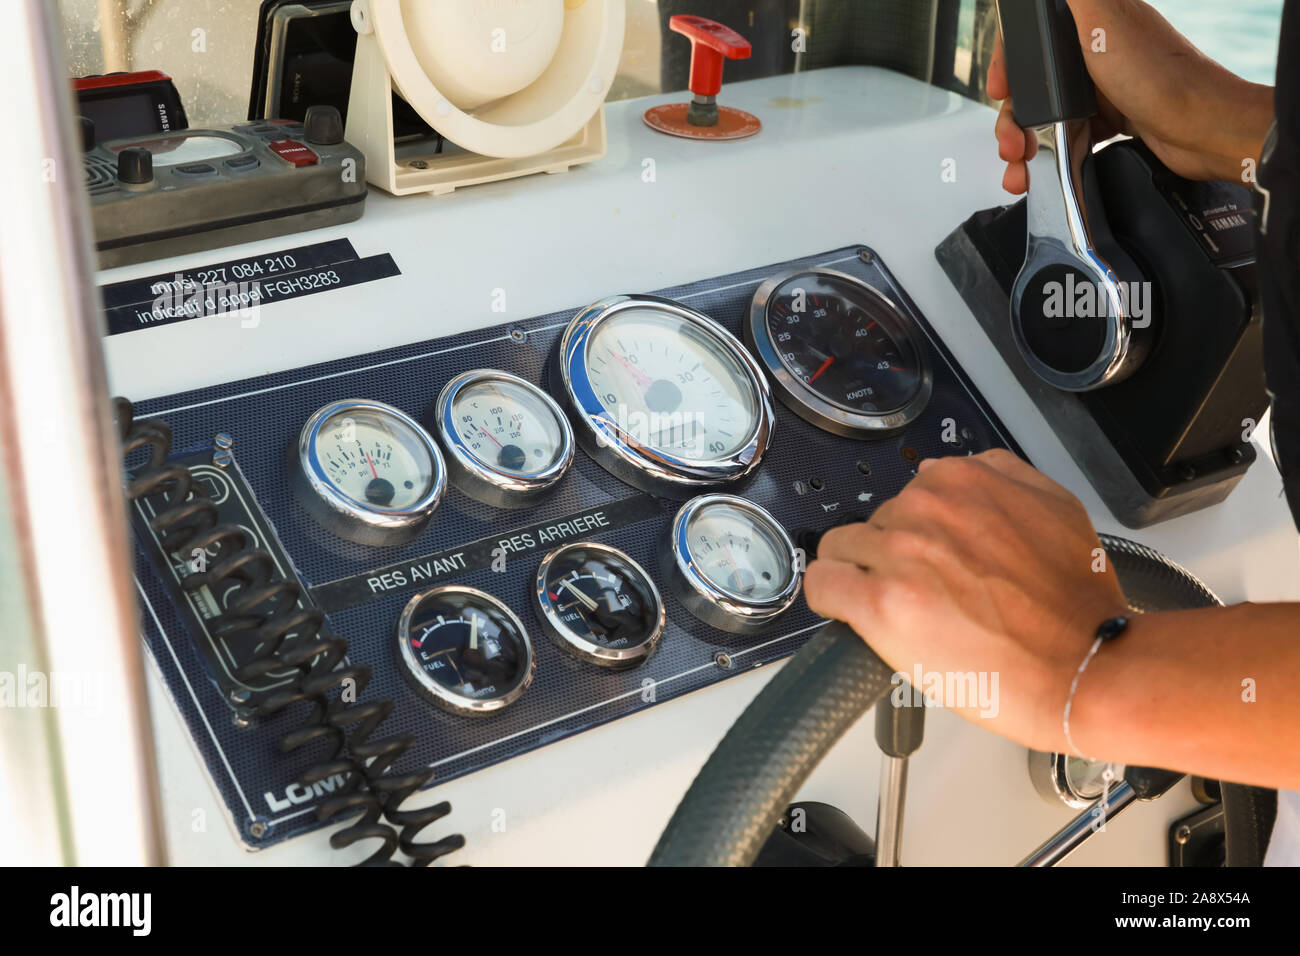 Ajaccio, France - June 30, 2015: Hands of a woman pilot are on a control panel of a fast motor boat Stock Photo